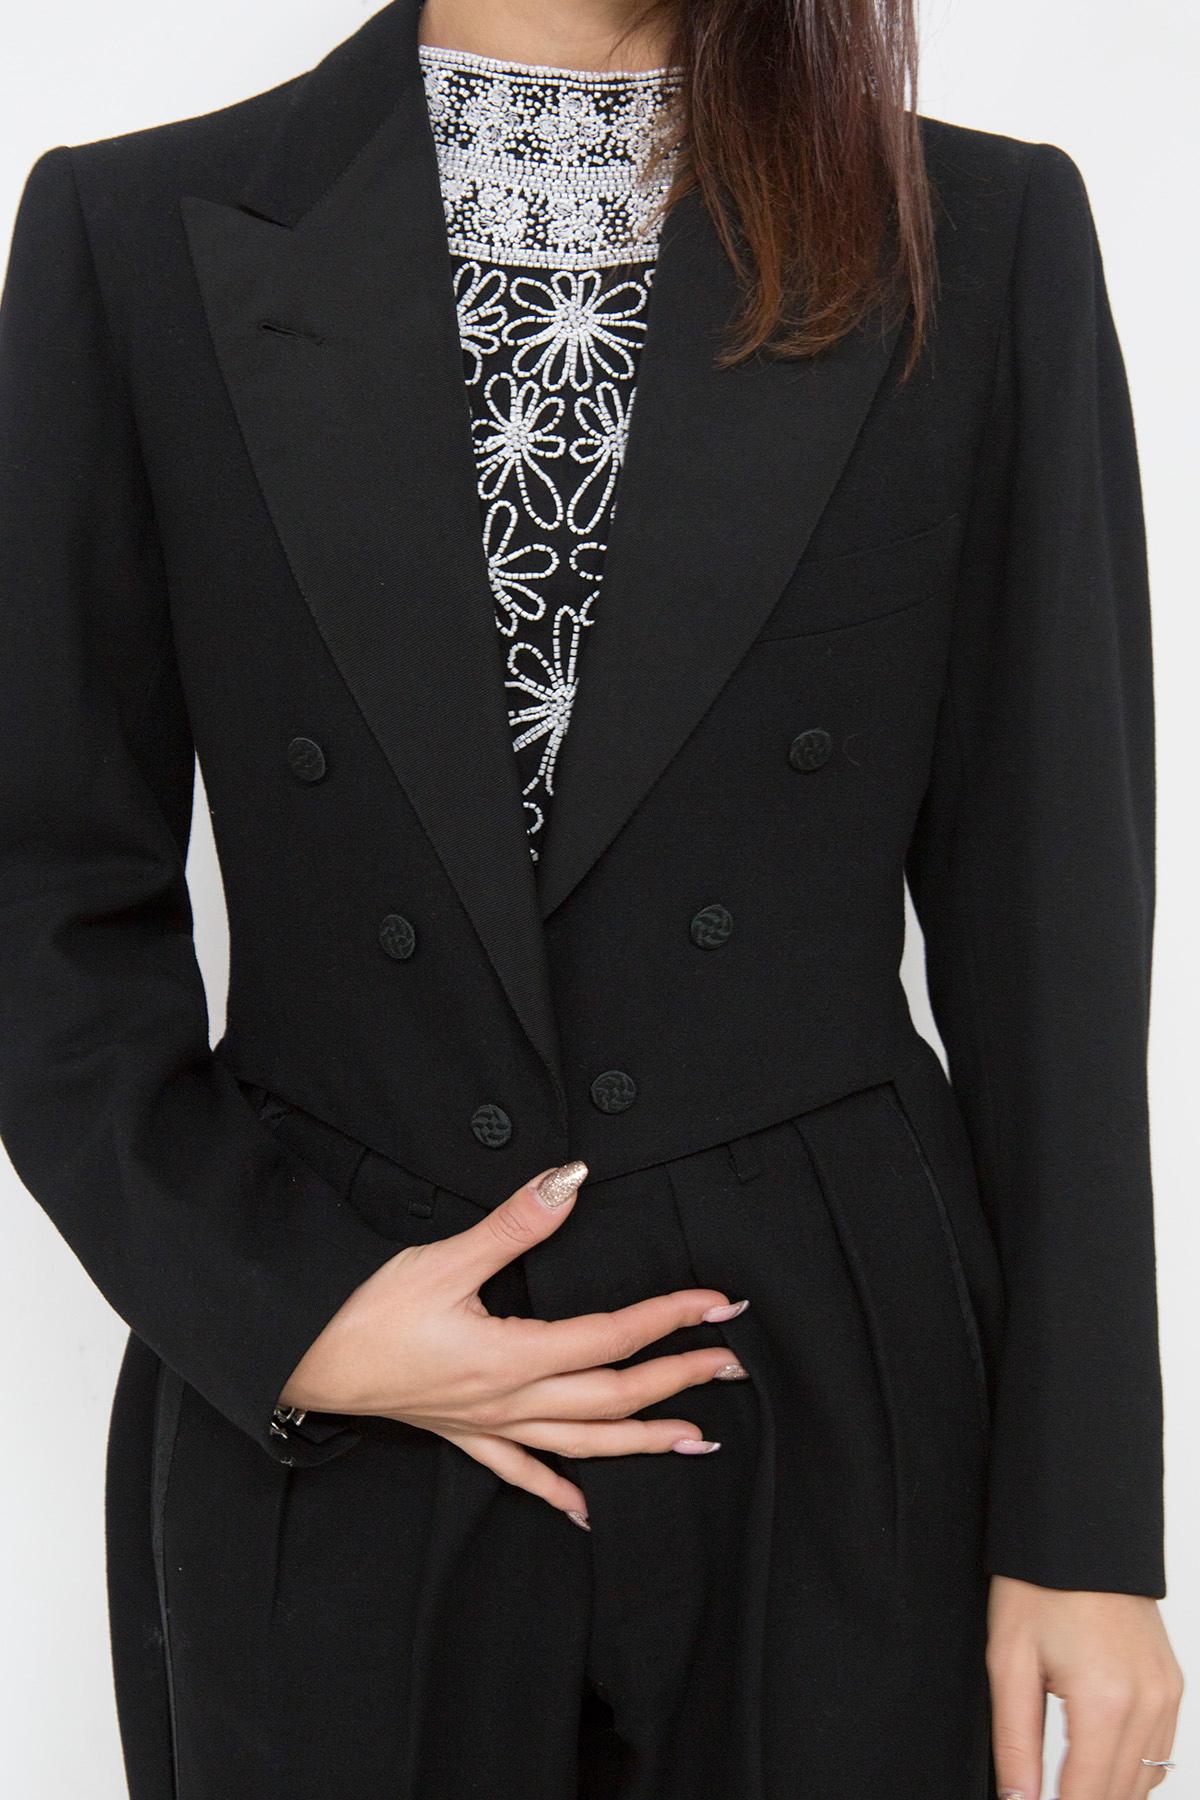 Gorgeous elegant two-piece black wool tight suit, very elegant.
The suit consists of two pieces: the jacket and the pants. The pants are beautiful and simple, falling softly on the foot. The jacket on the other hand is very elegant: it is a